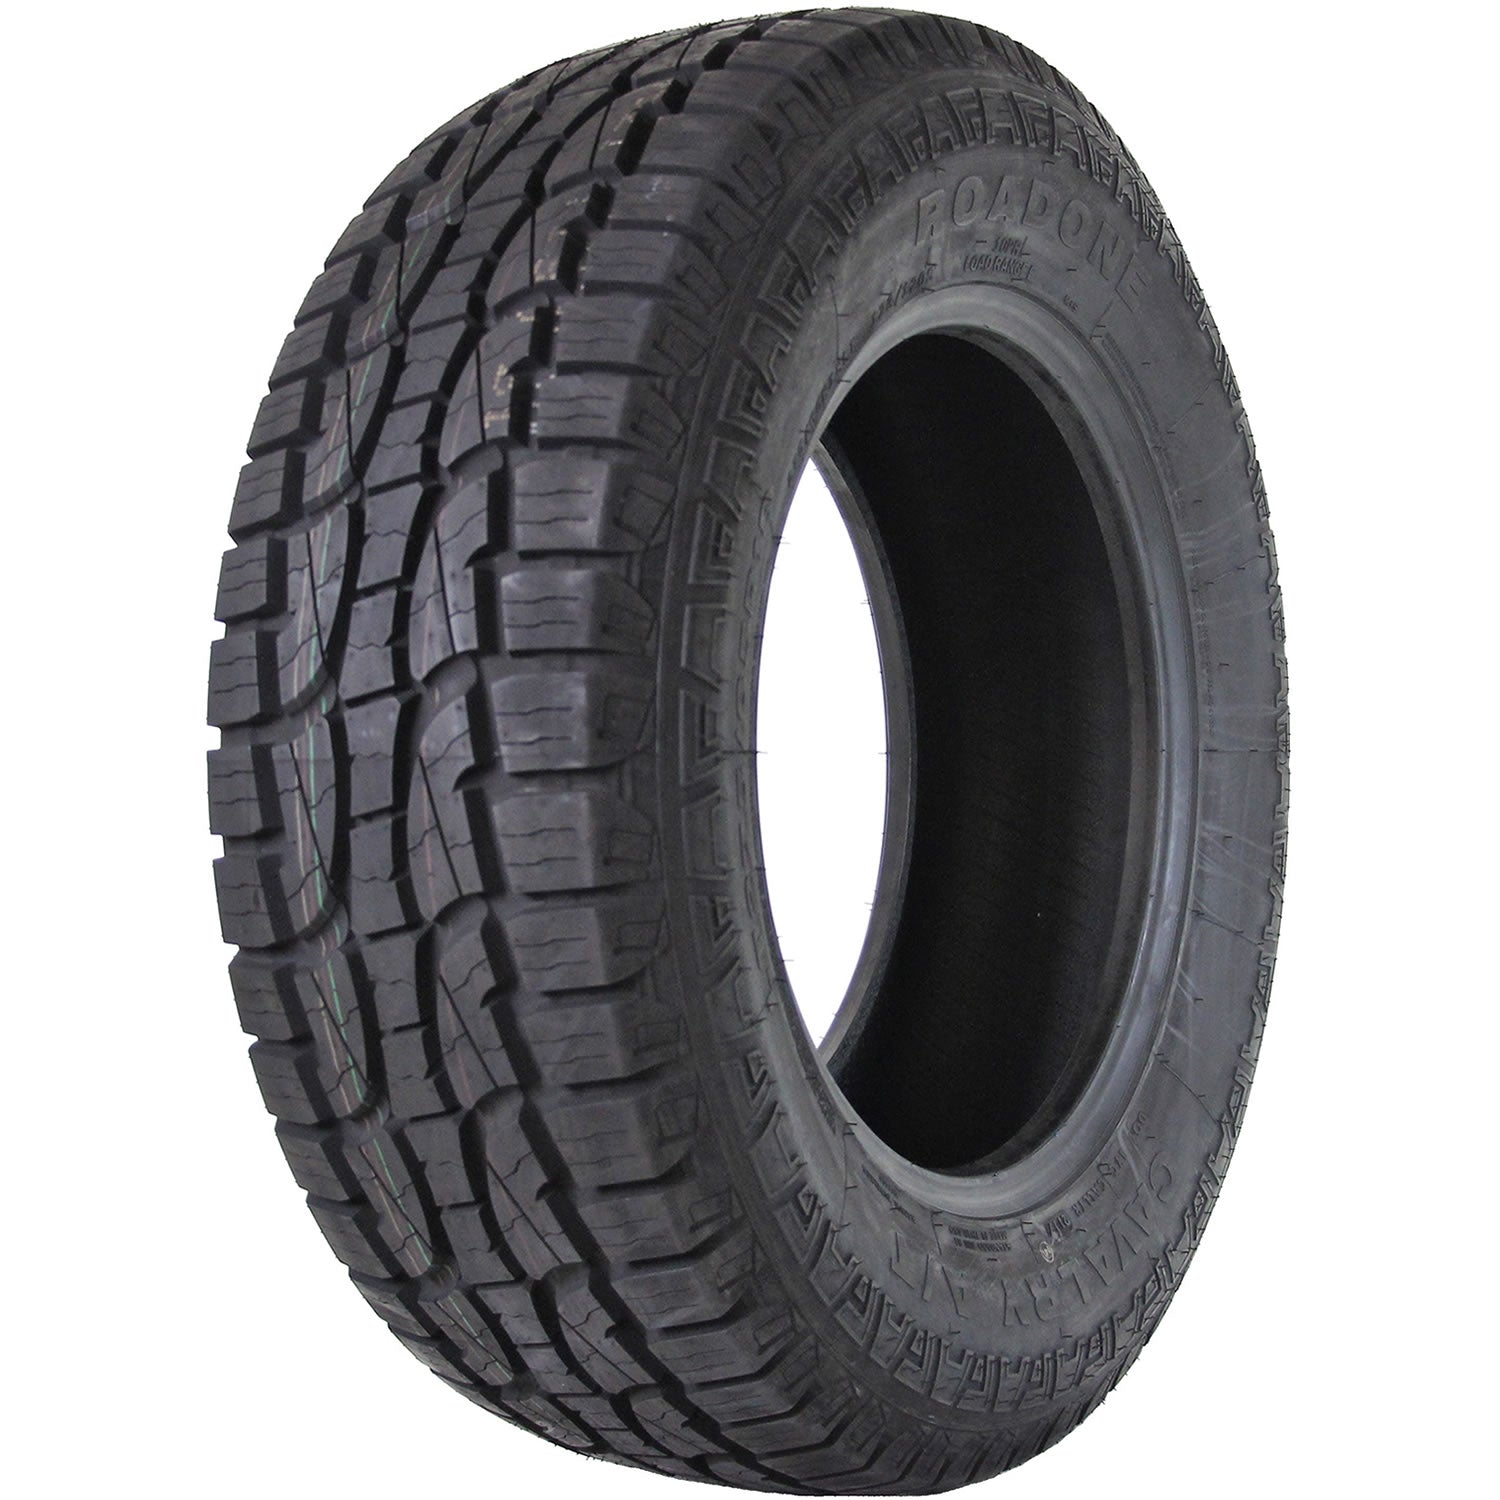 ROAD ONE CAVALRY A/T P275/55R20 (31.9X11.2R 20) Tires